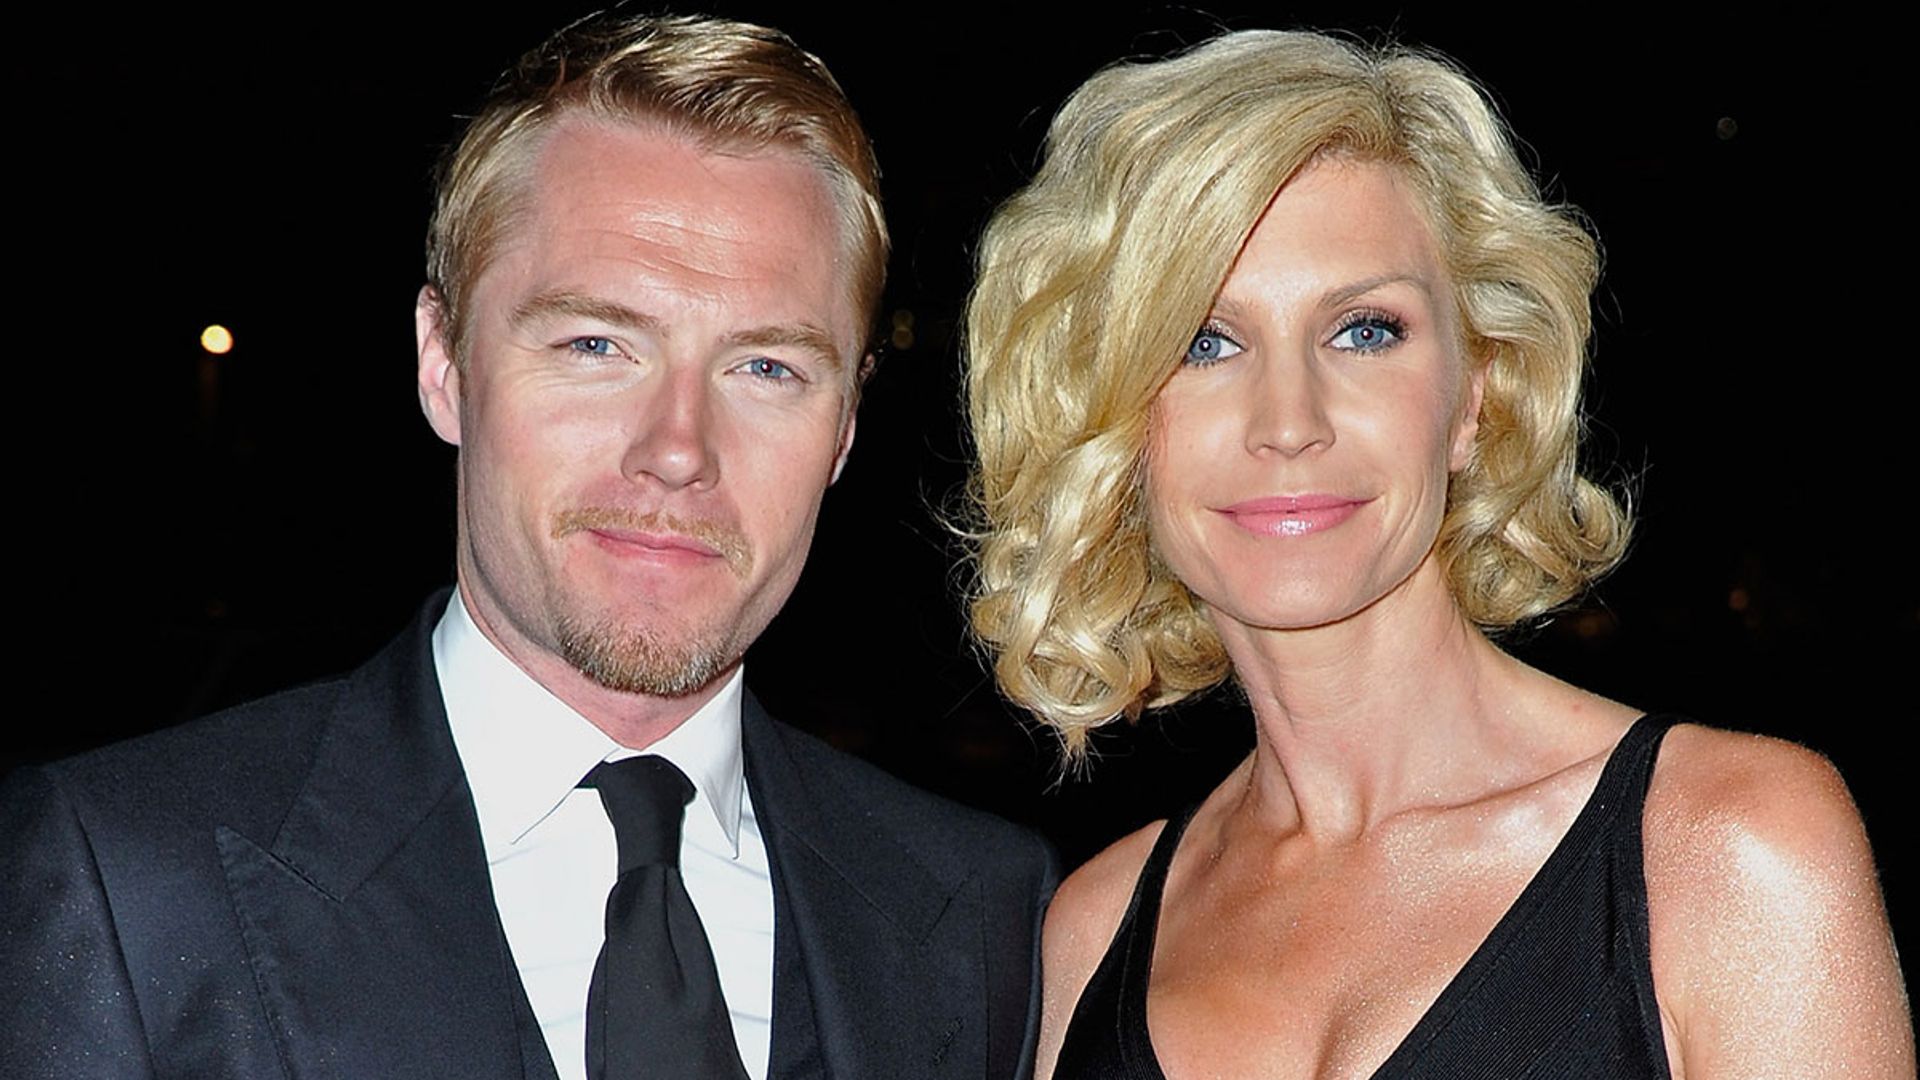 Ronan Keating and ex-wife Yvonne reunite 12 years after split for daughter Missy's 21st birthday